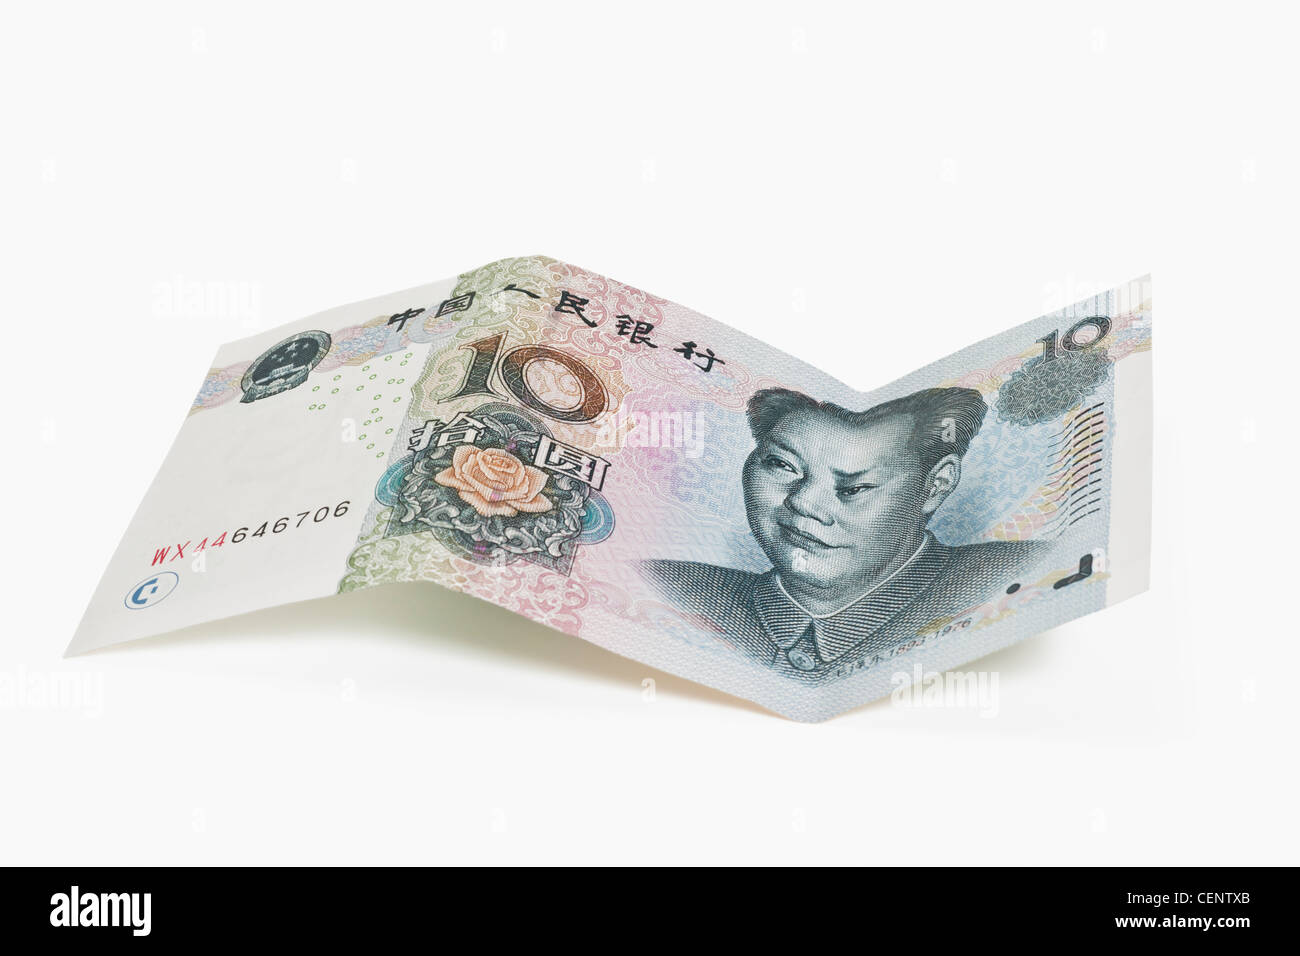 10 yuan bill with the portrait of Mao Zedong. The renminbi, the Chinese currency, was introduced in 1949. Stock Photo